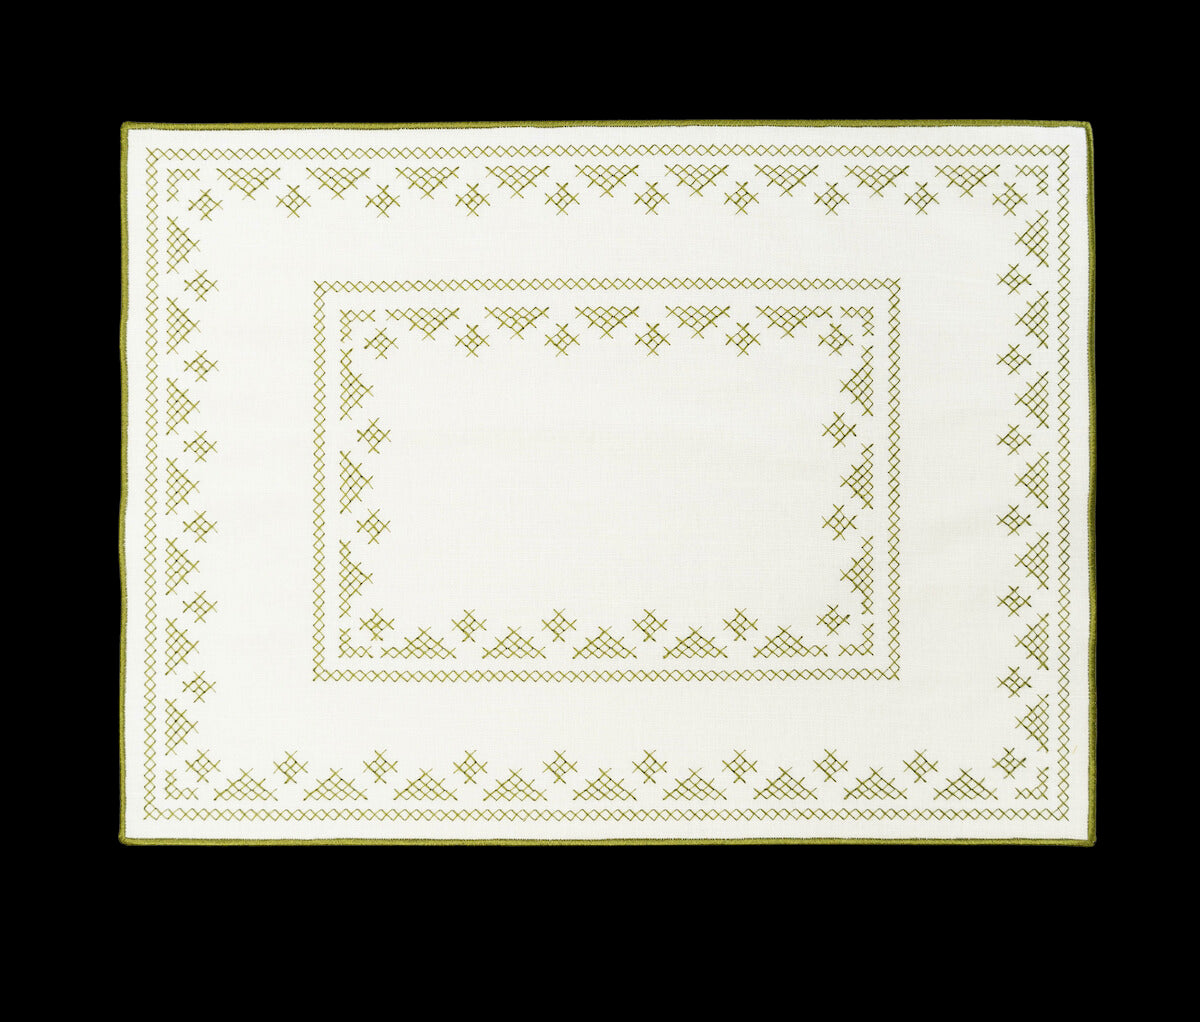 Pedralbes Placemat in Olive Green